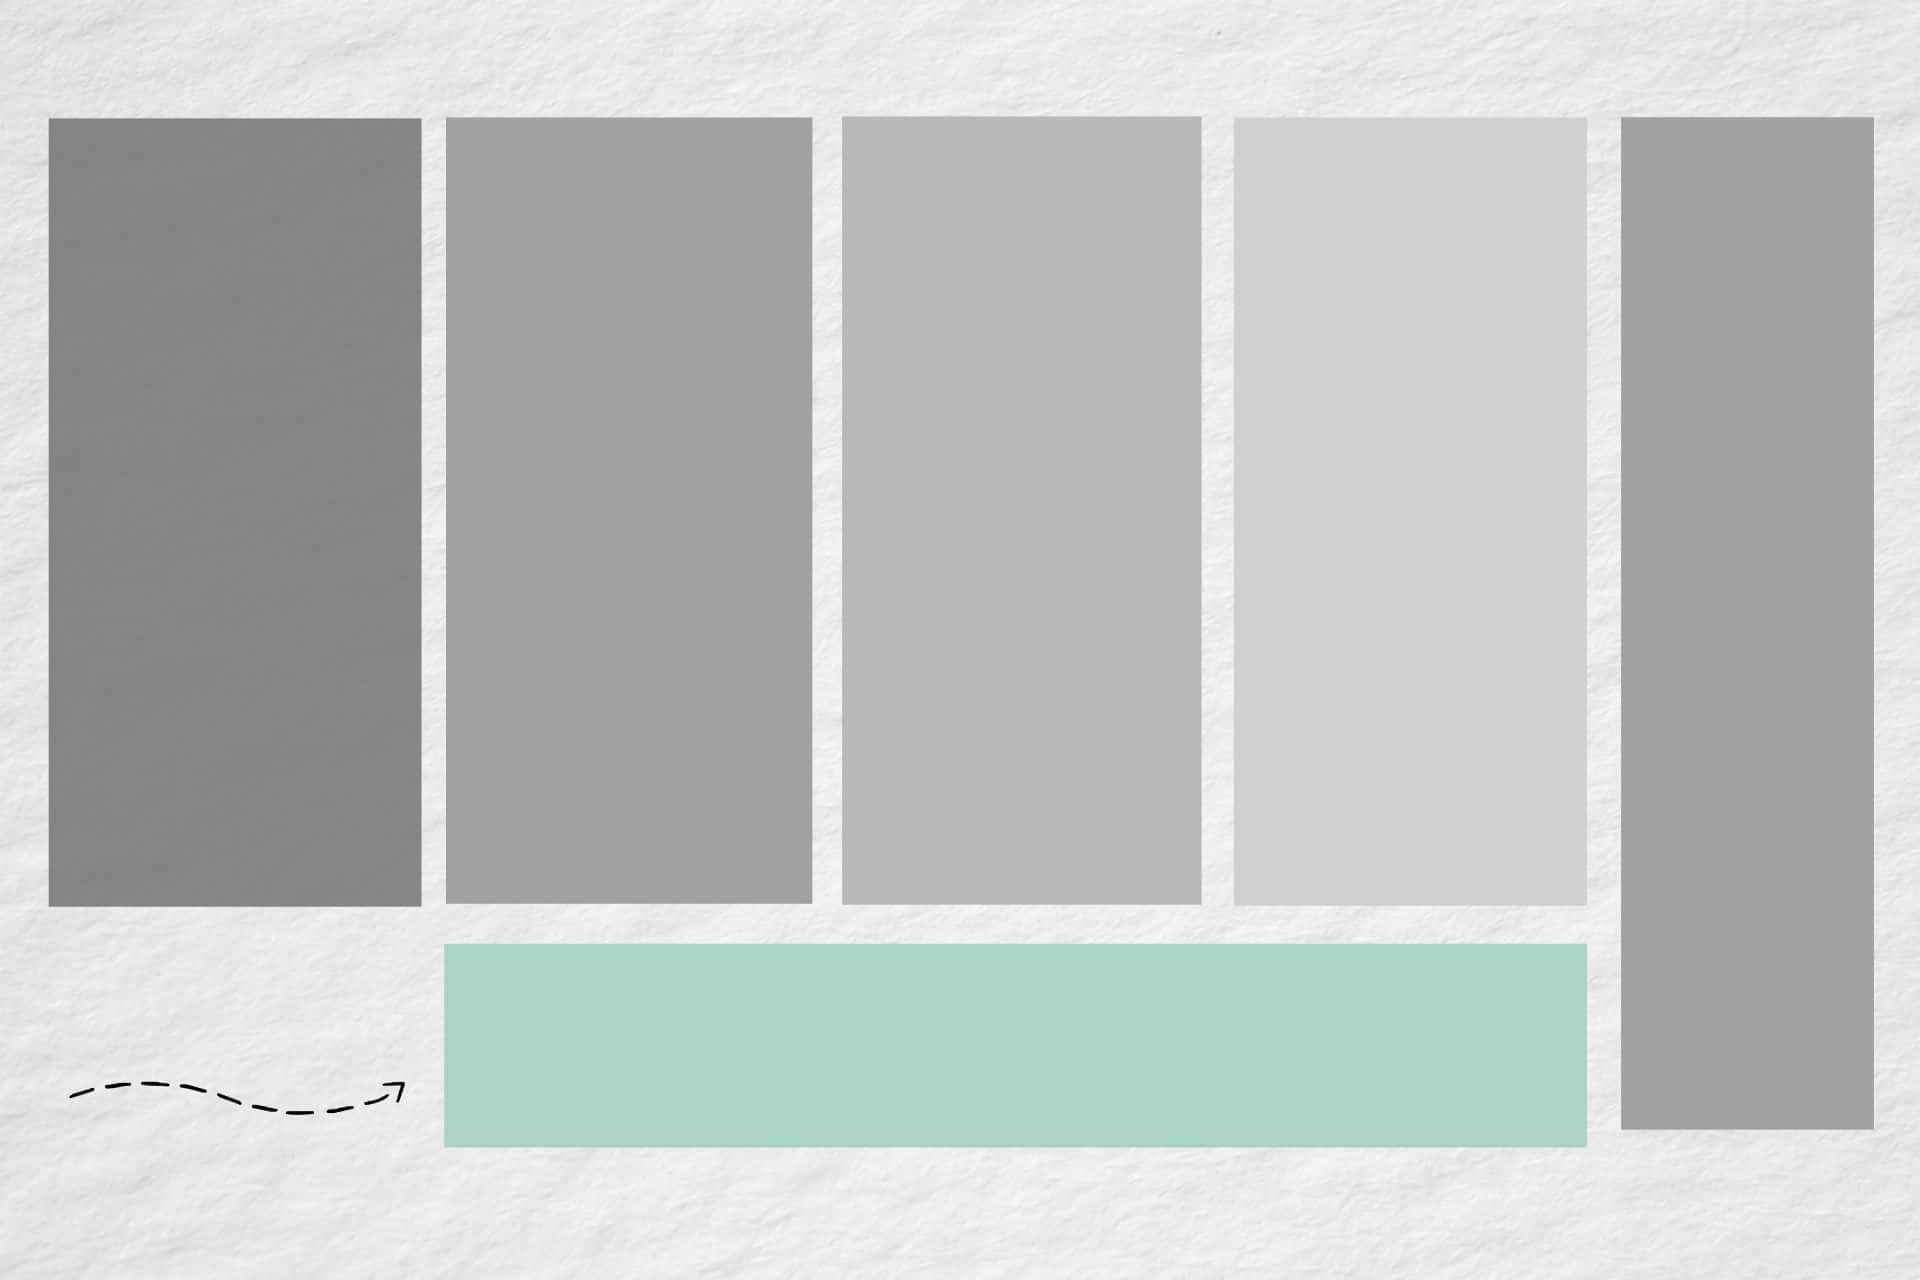 A Grey And Green Color Palette With A White Arrow